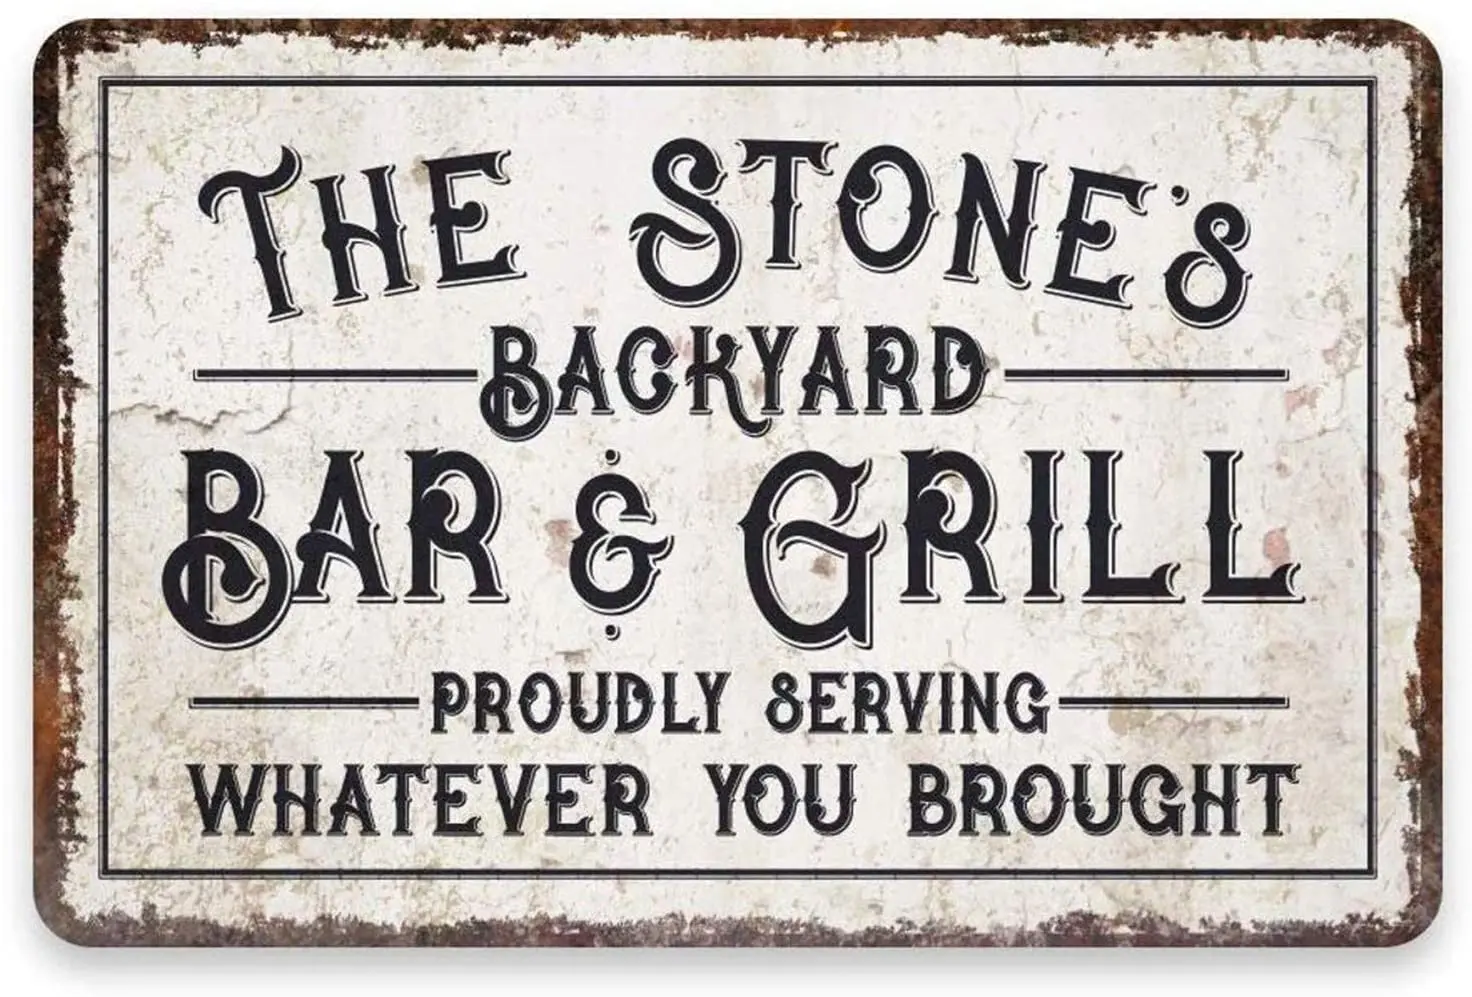 

Personalized Backyard Bar and Grill Metal Sign Vintage Distressed Look Custom Signs for Bar Decor Proudly Serving Whatever You